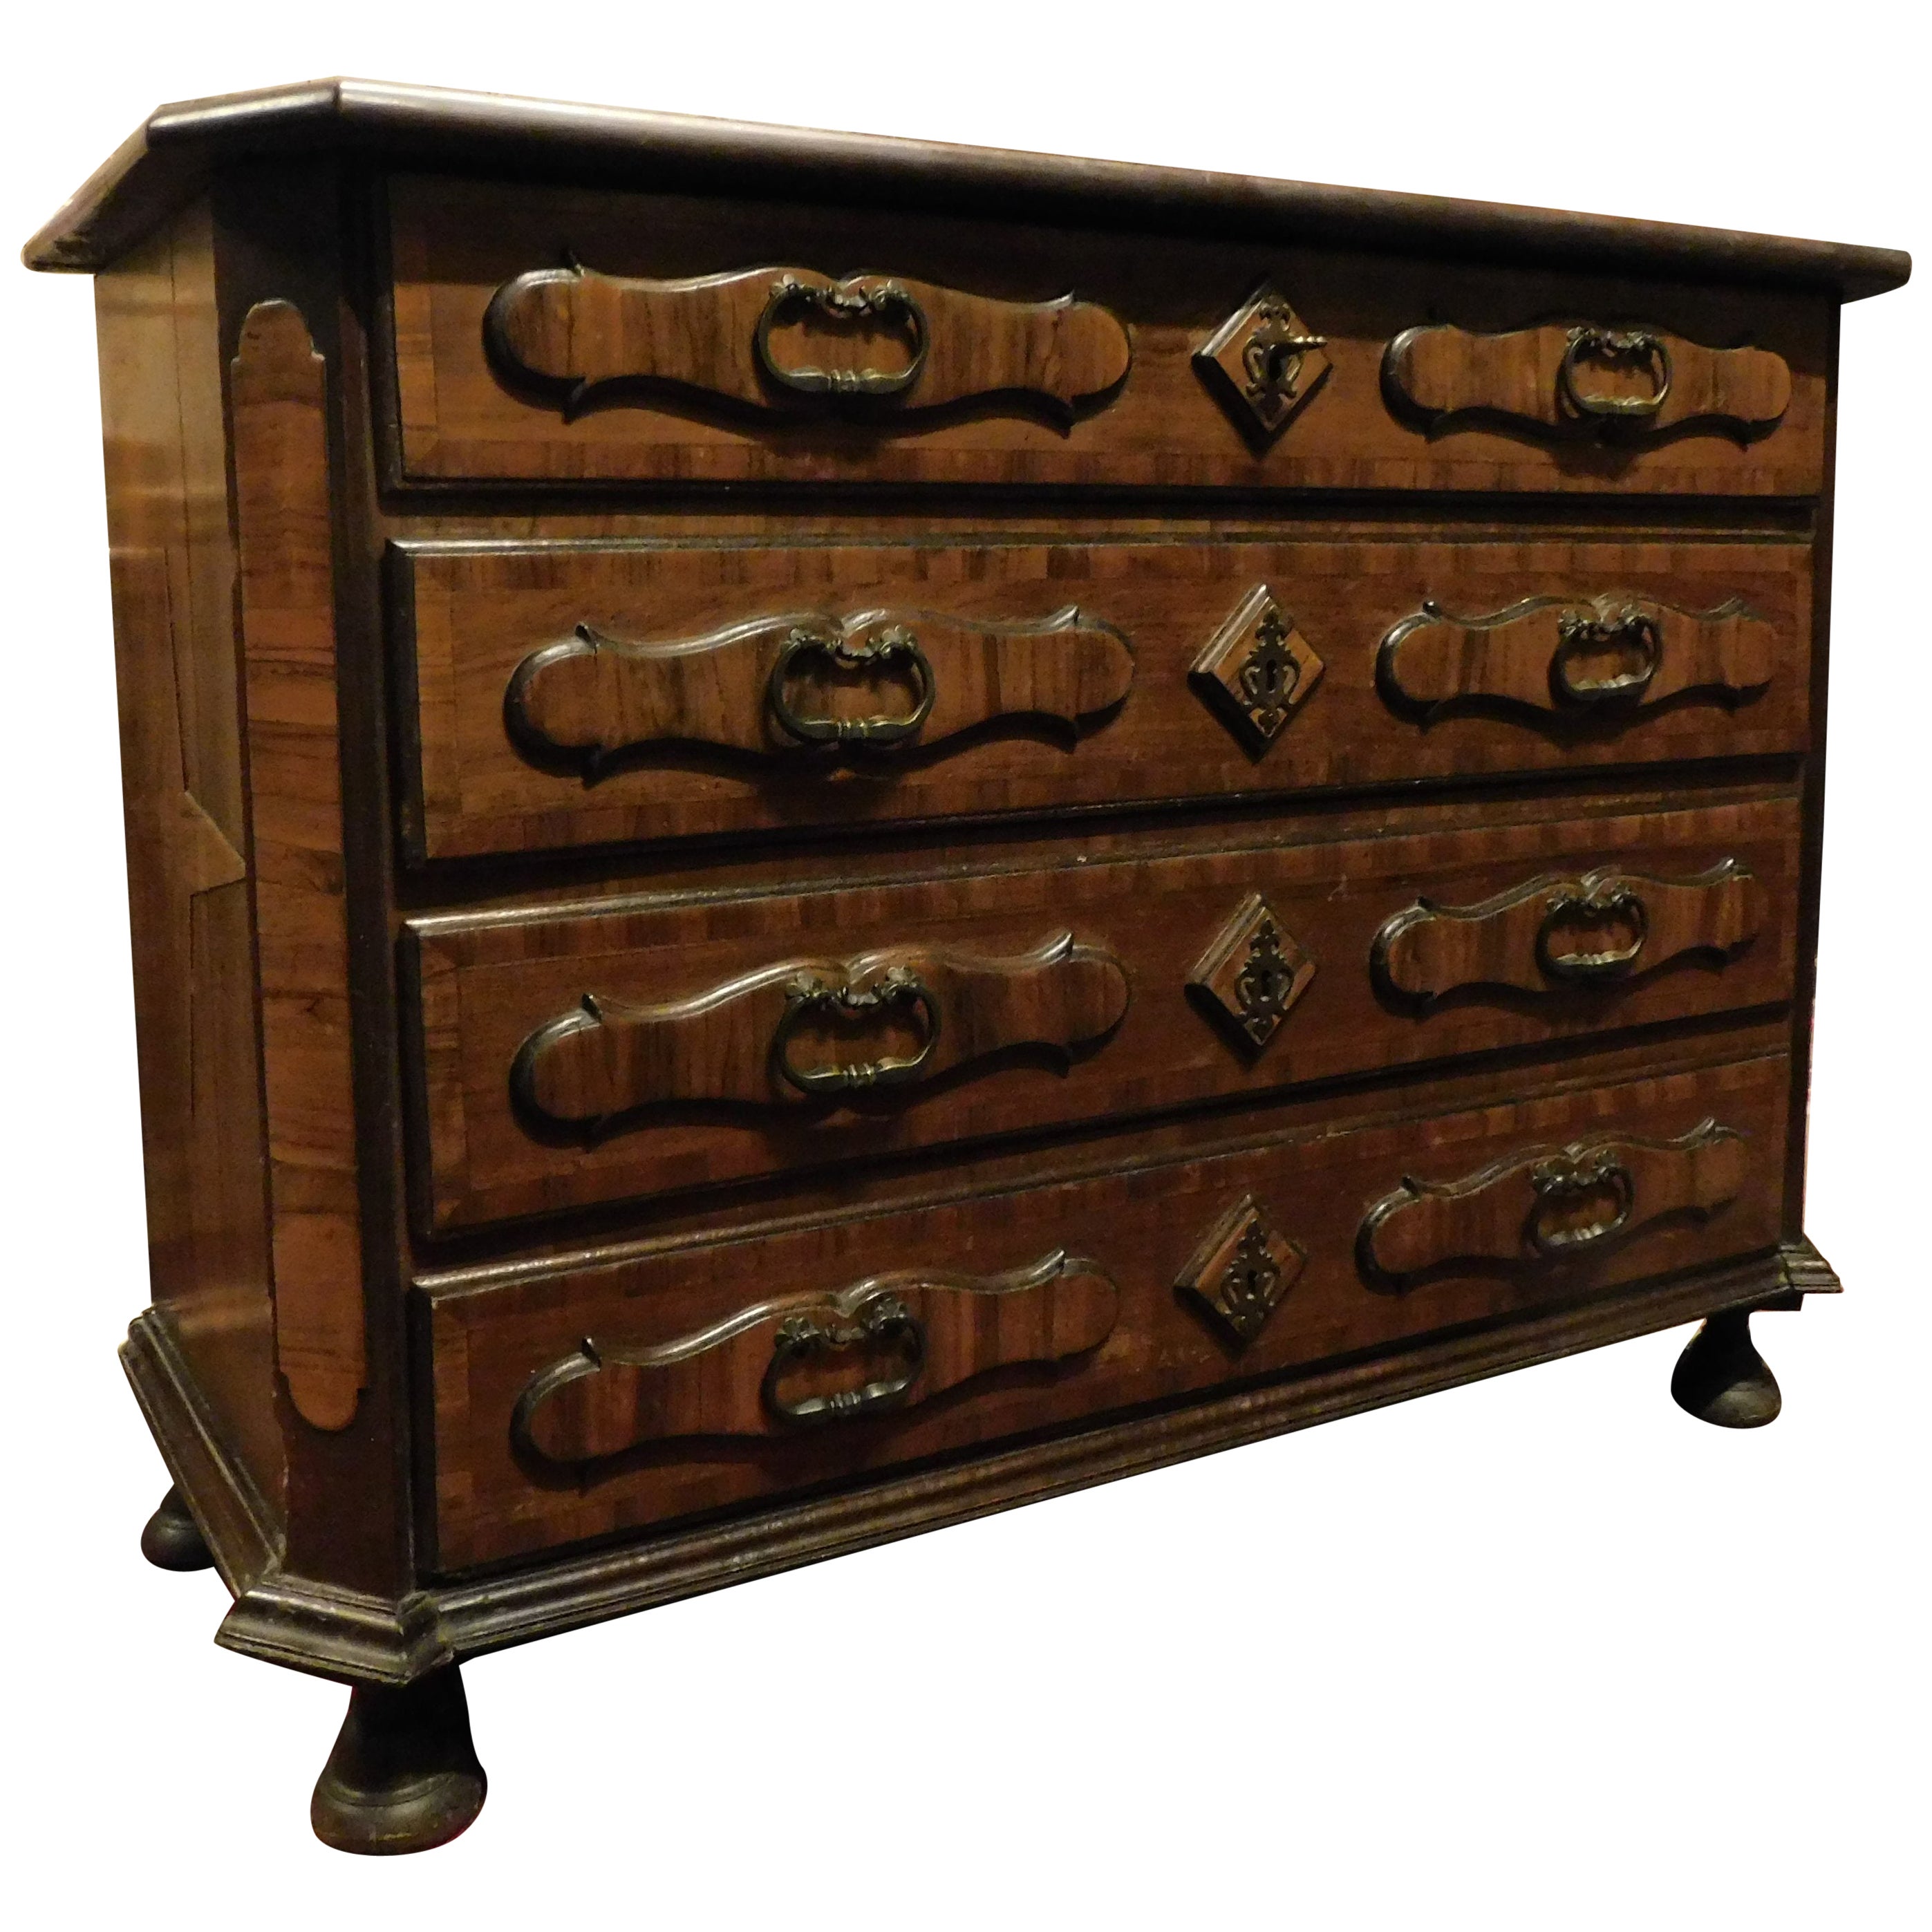 Antique Commodes, Chest of Drawers Walnut Inlaid Briar, 18th Century Italy For Sale